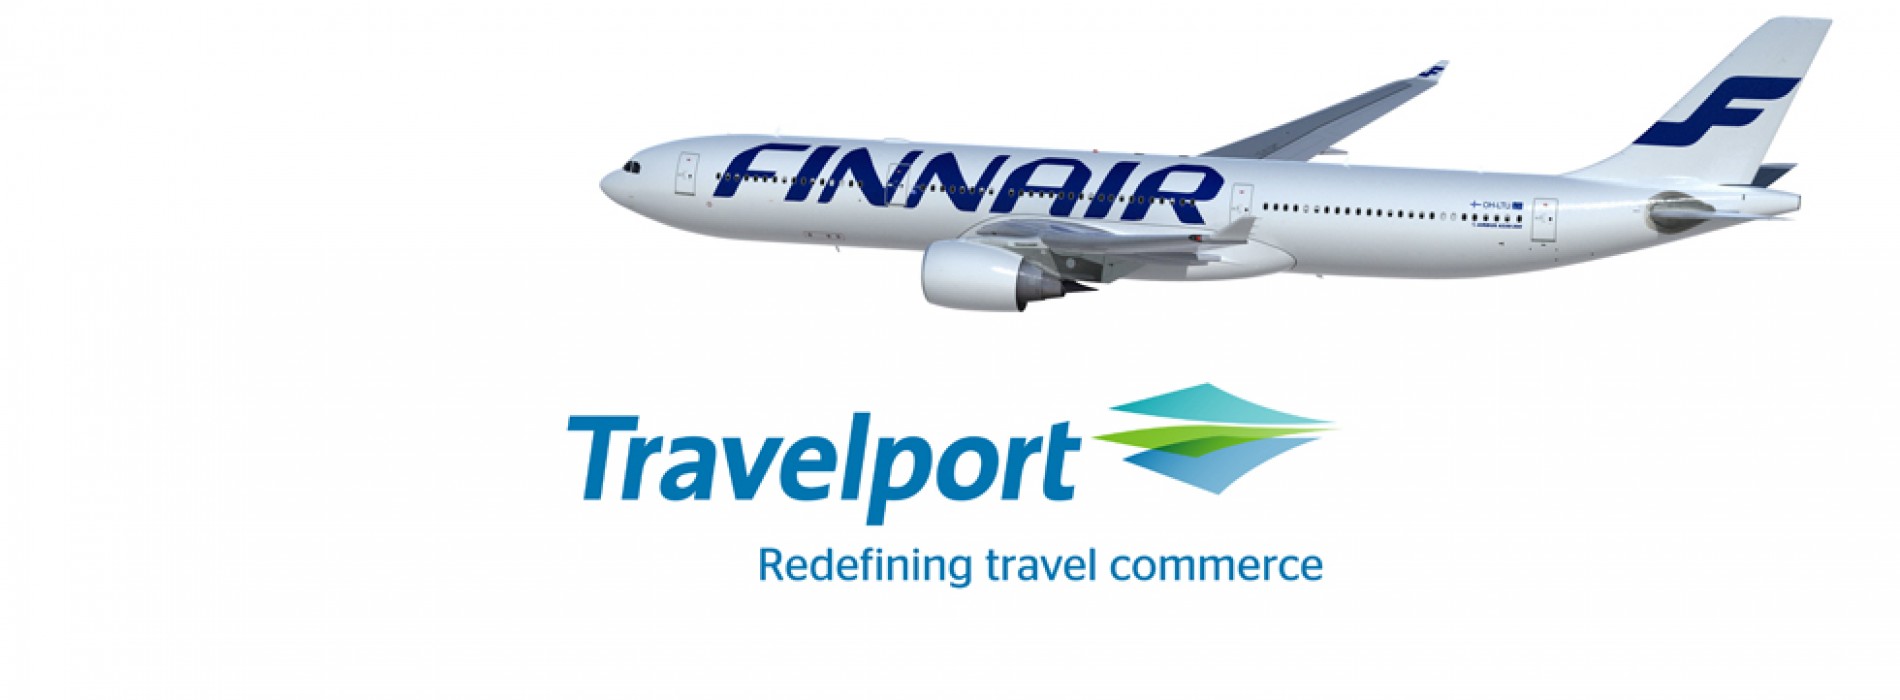 Finnair signs up for Travelport Rich Content distribution